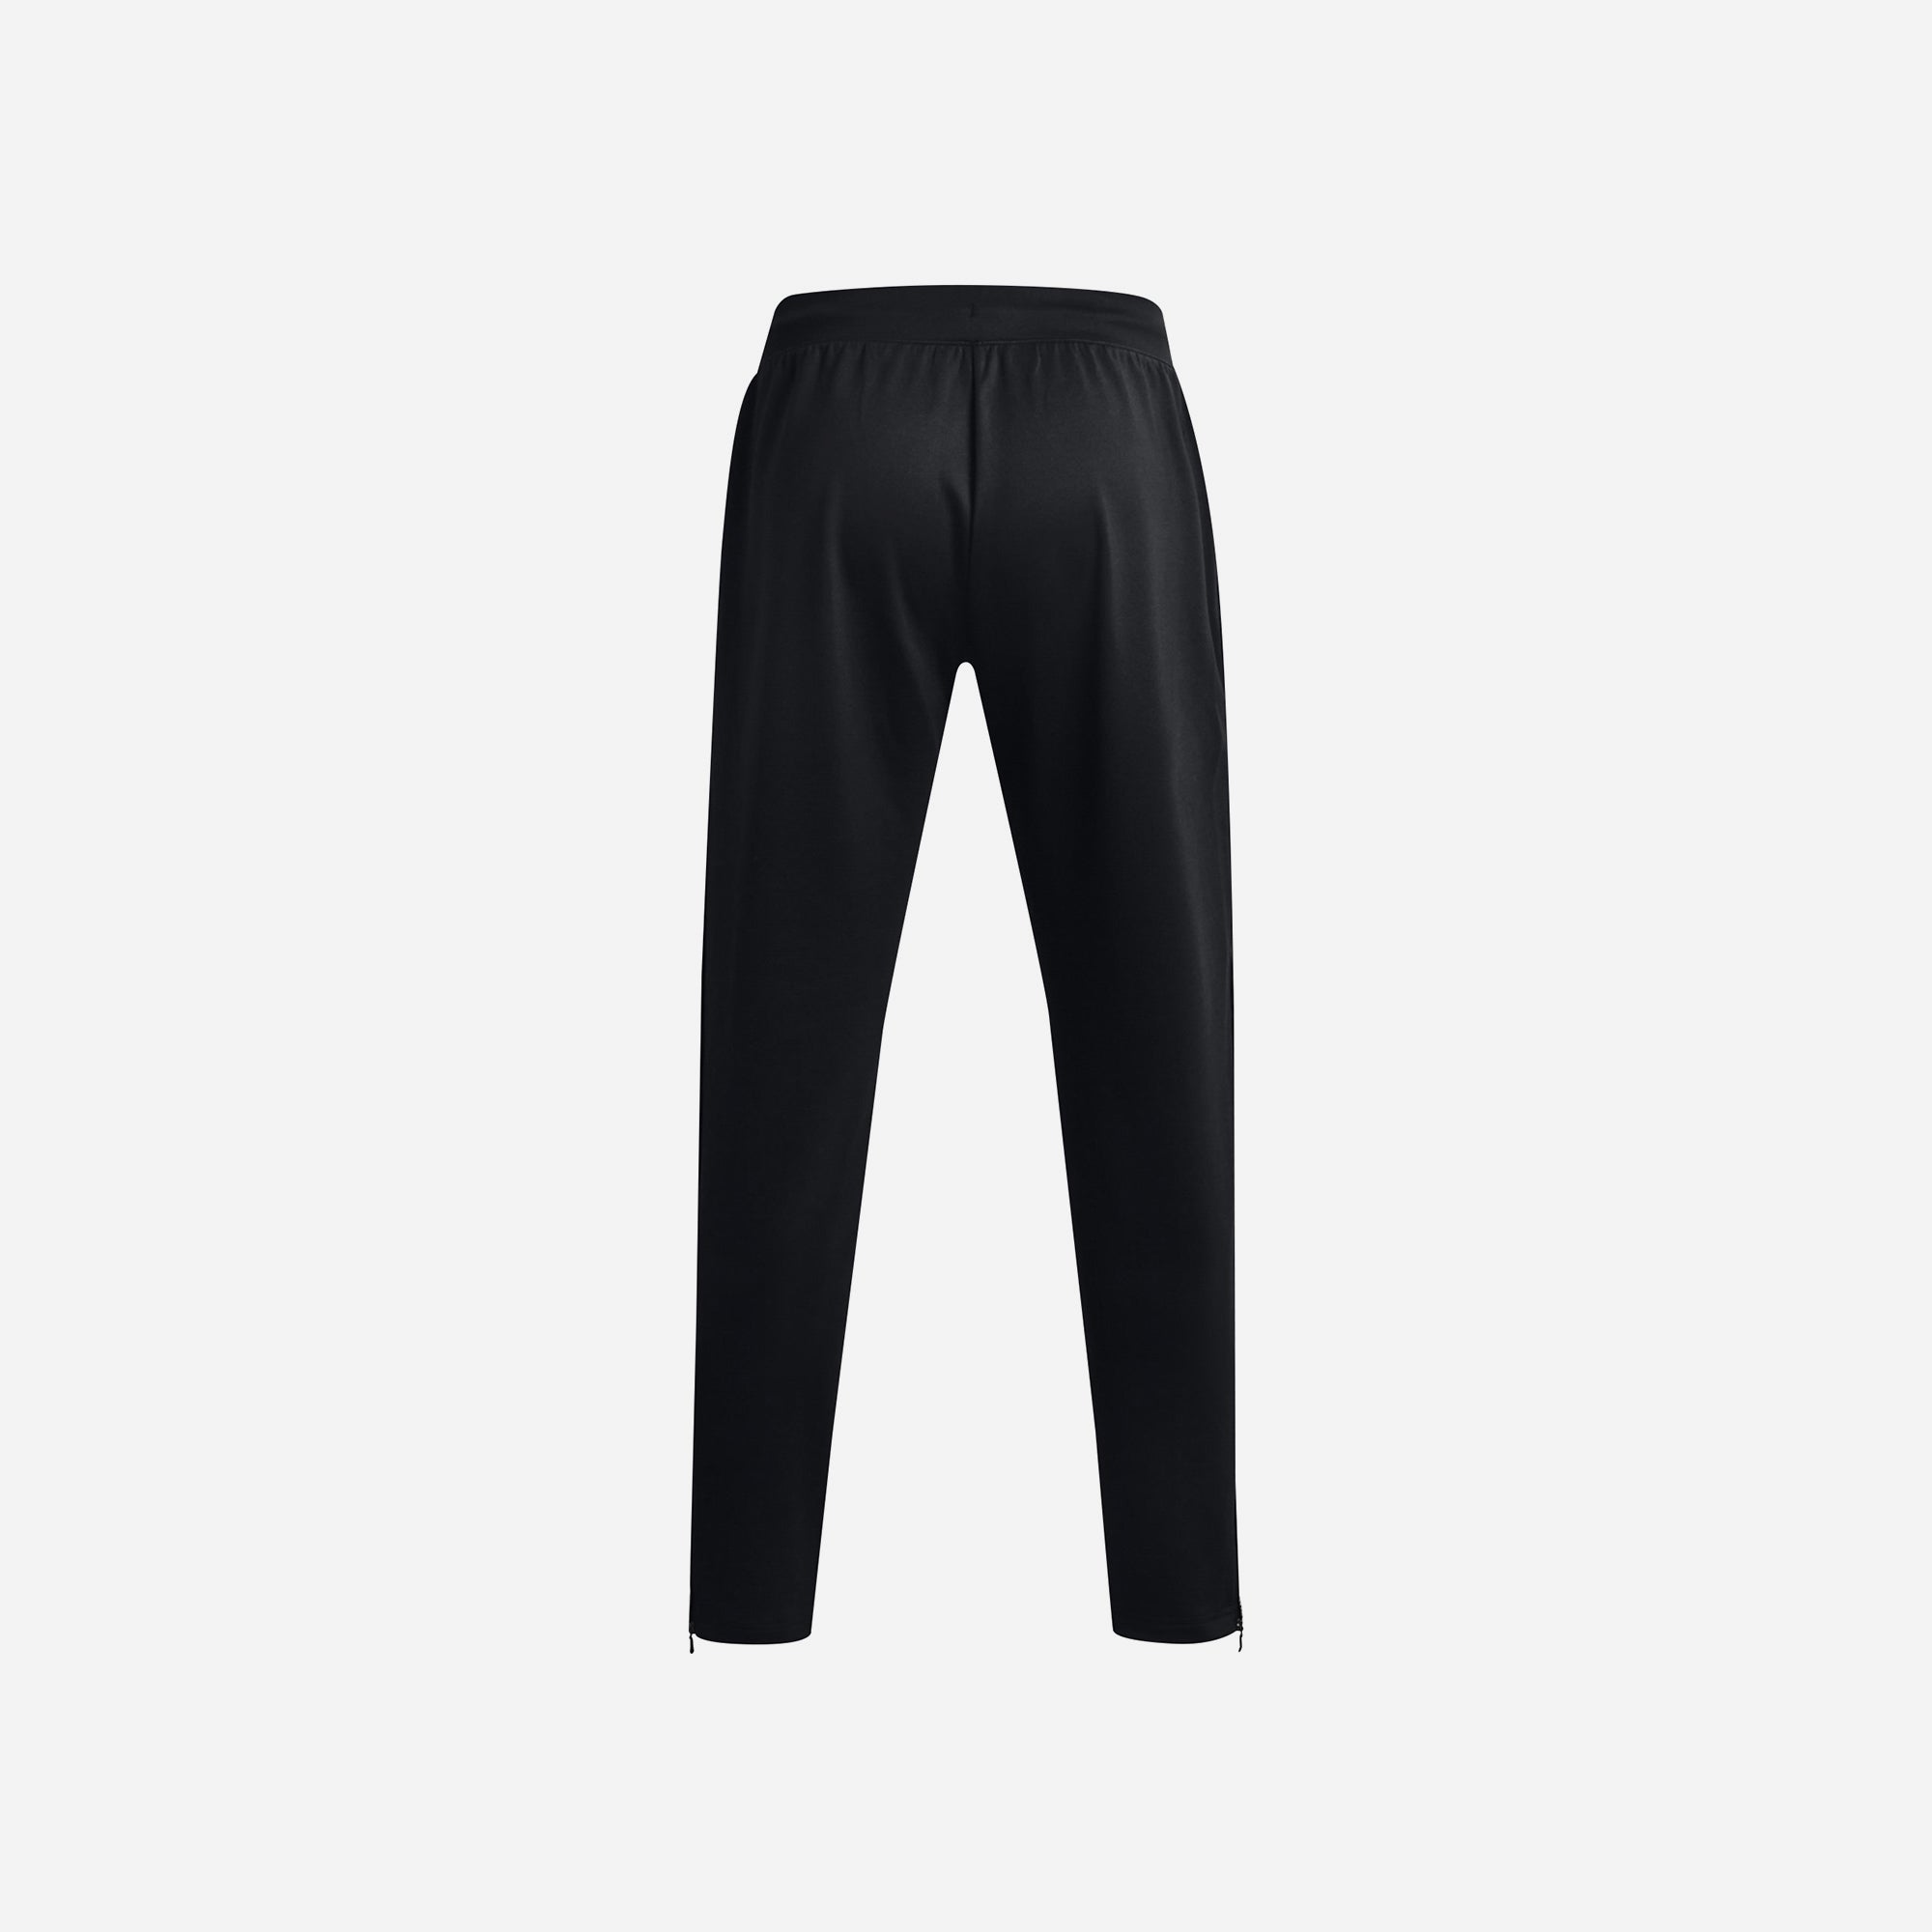 Supersports Vietnam Official  Women's Nike Woven Trousers Joggers